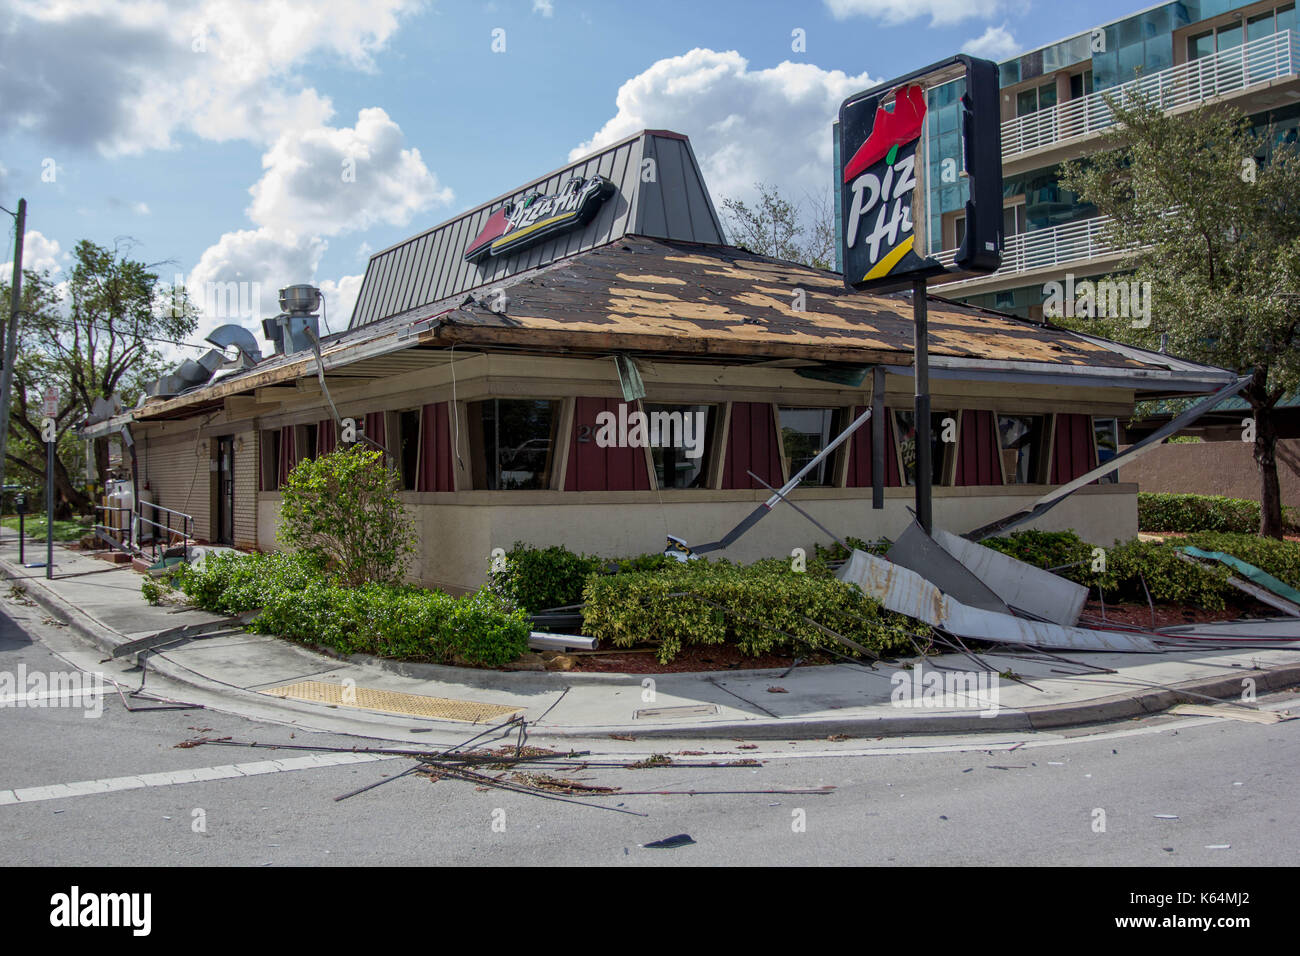 Miami, Florida, USA. 11th Sep, 2017. A Pizza Hut restaurant heavily damaged by Hurricane Irma is seen in Miami, Florida, Monday, September 11, 2017. Credit: Michael Candelori/Alamy Live News Stock Photo